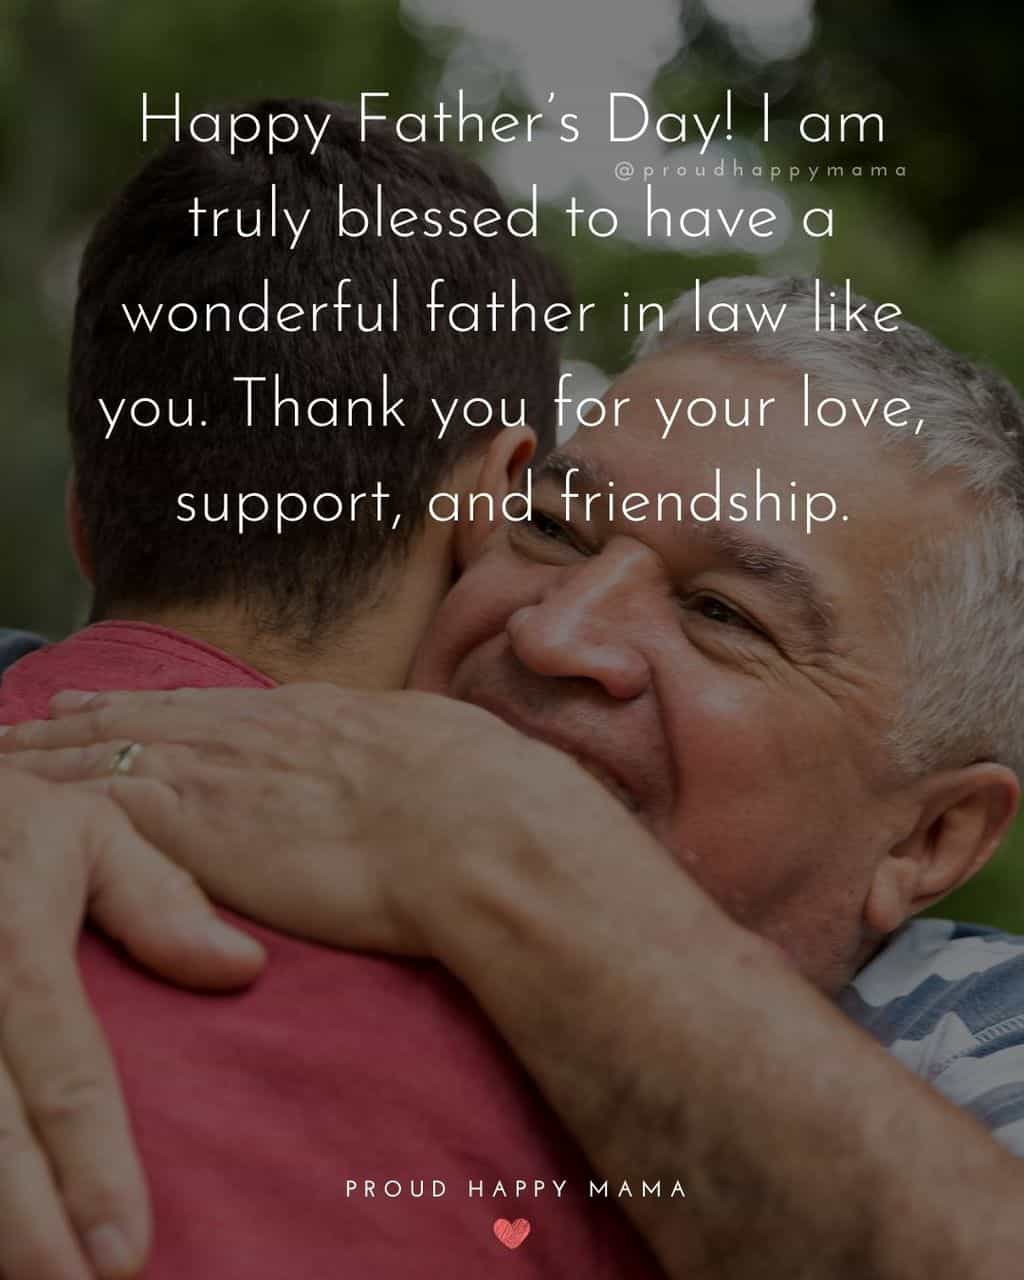 Happy Fathers Day Quotes For Father In Law - Happy Father’s Day! I am truly blessed to have a wonderful father in law like you.